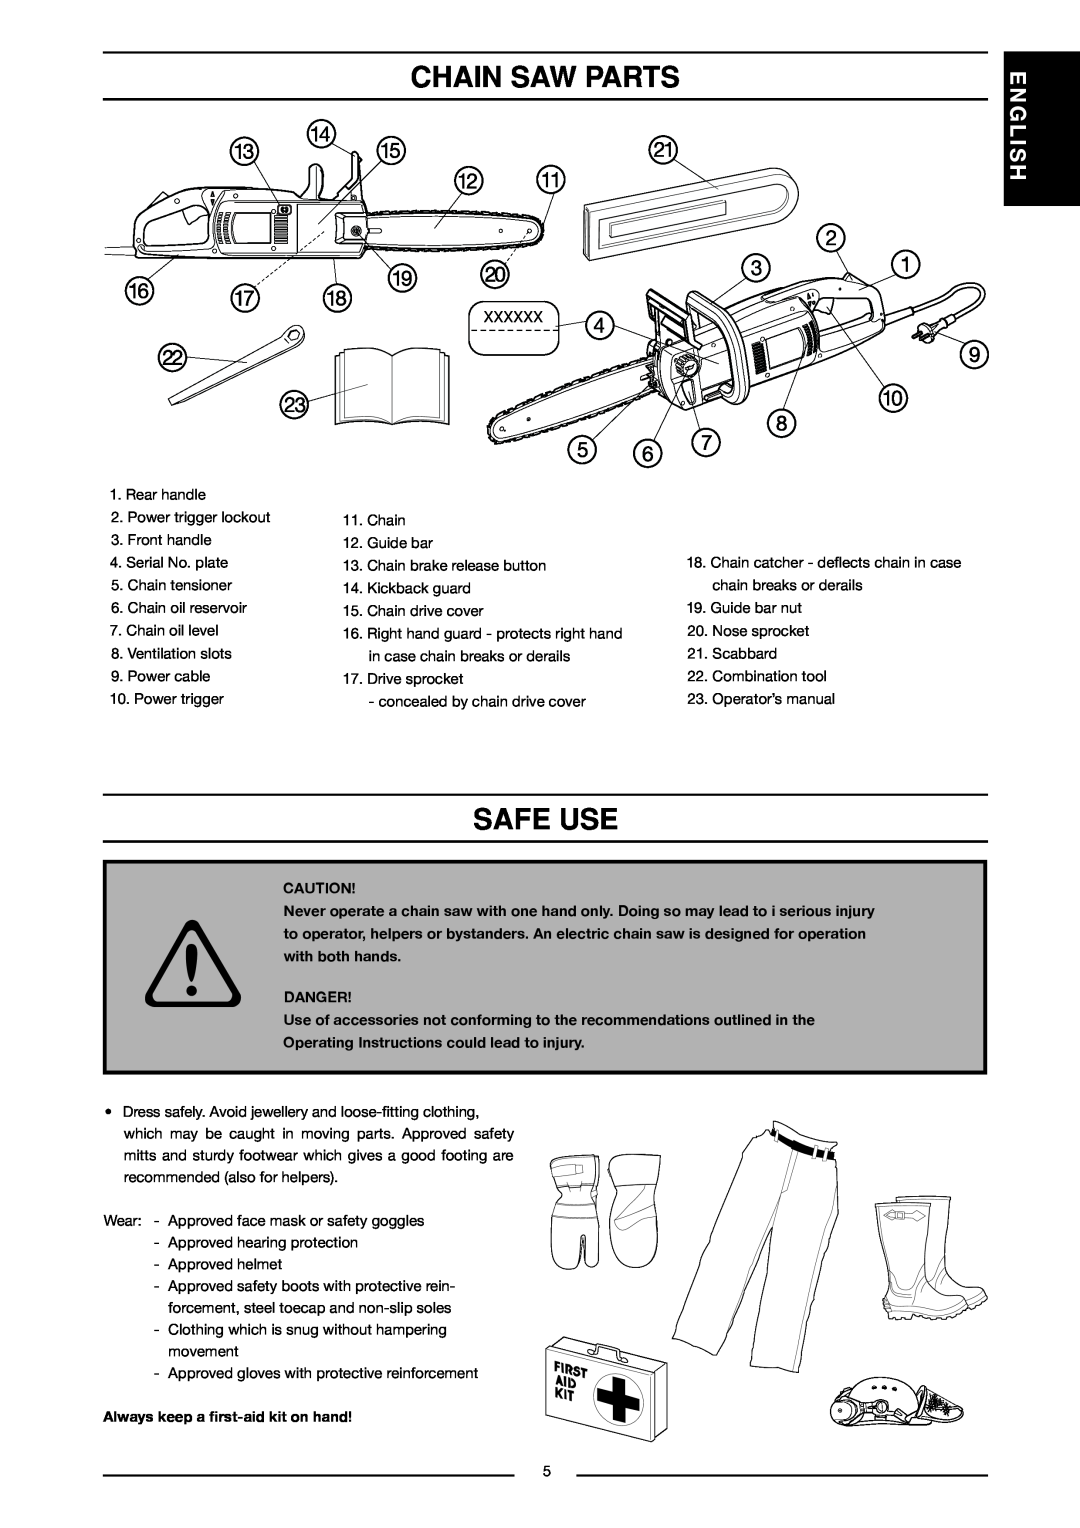 Jonsered CS 2117 EL, CS 2121 EL Chain Saw Parts, Safe Use, English, Danger, Operating Instructions could lead to injury 